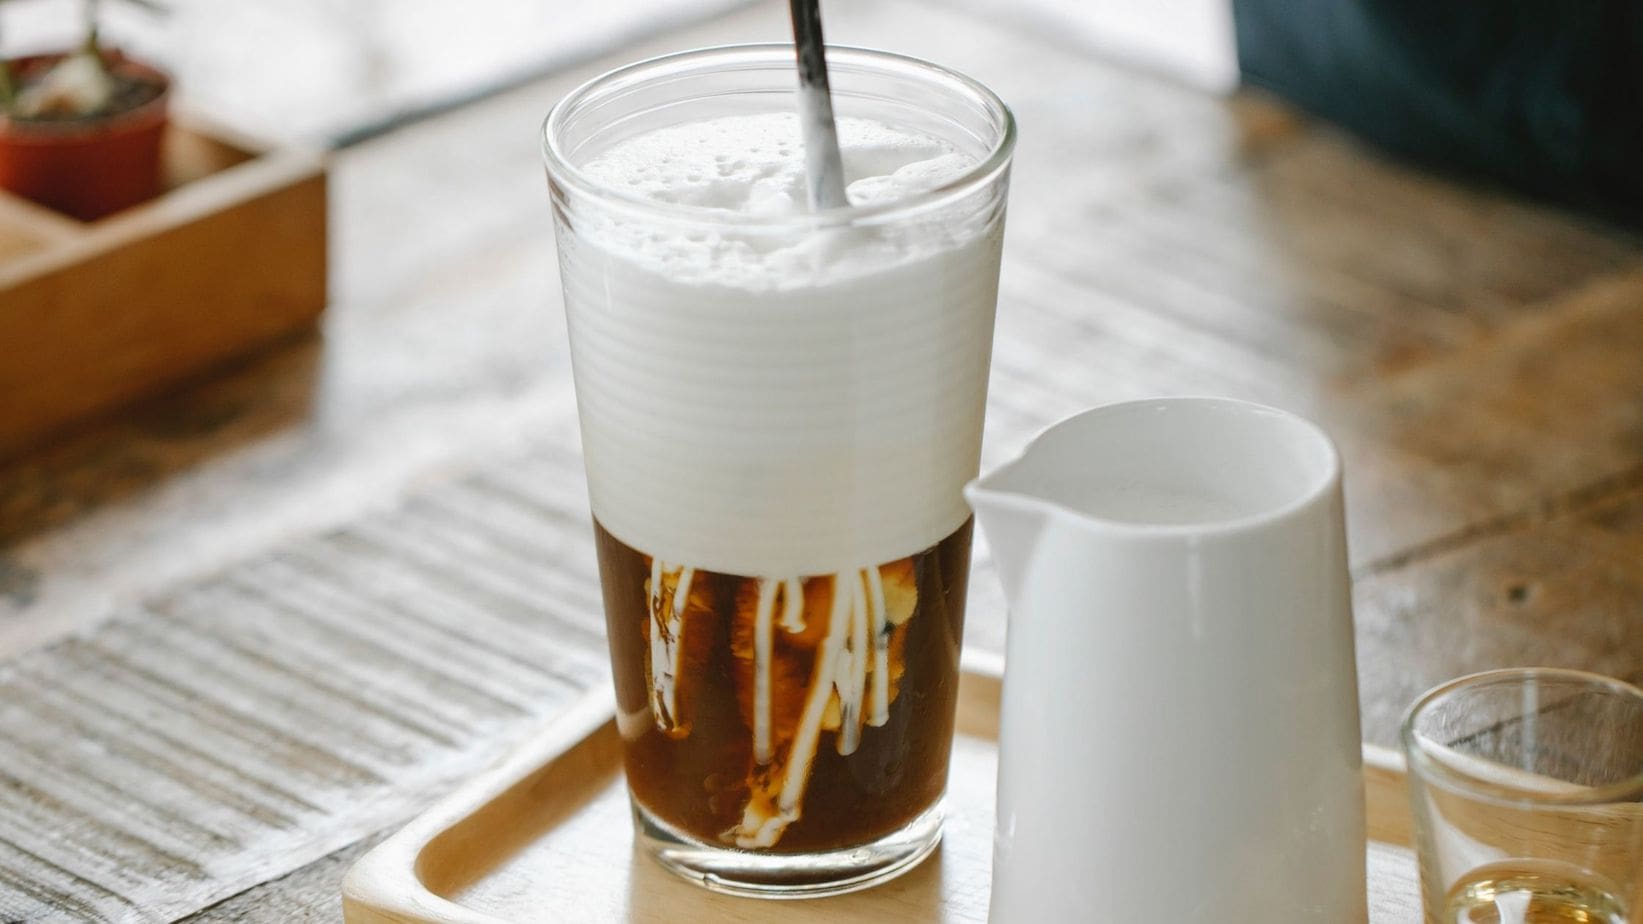 https://www.roastycoffee.com/wp-content/uploads/How-To-Make-Cold-Foam-For-Coffee.jpg